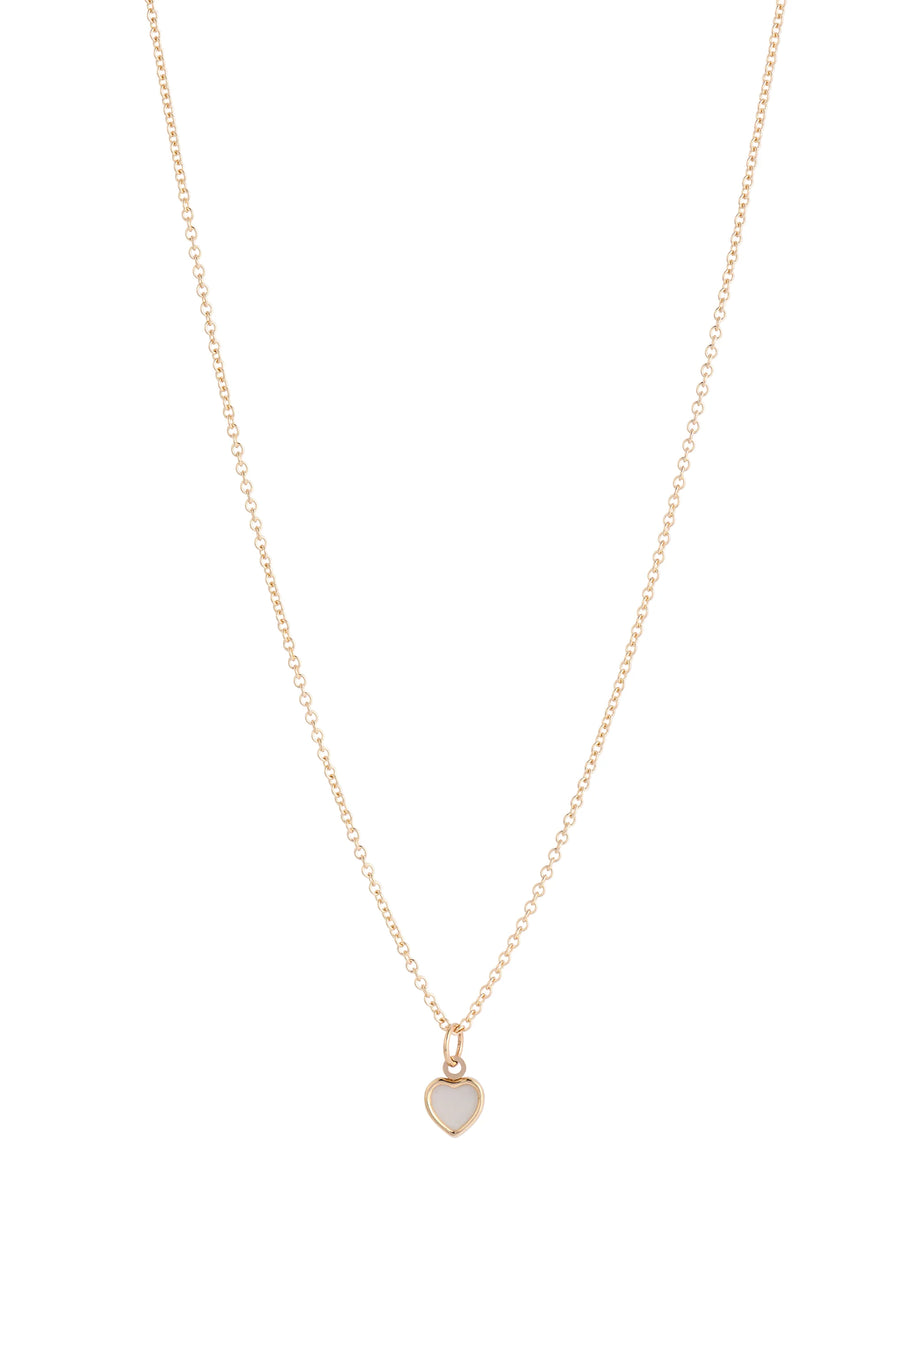 LISBETH JEWELRY - ESME NECKLACE - FILLED GOLD